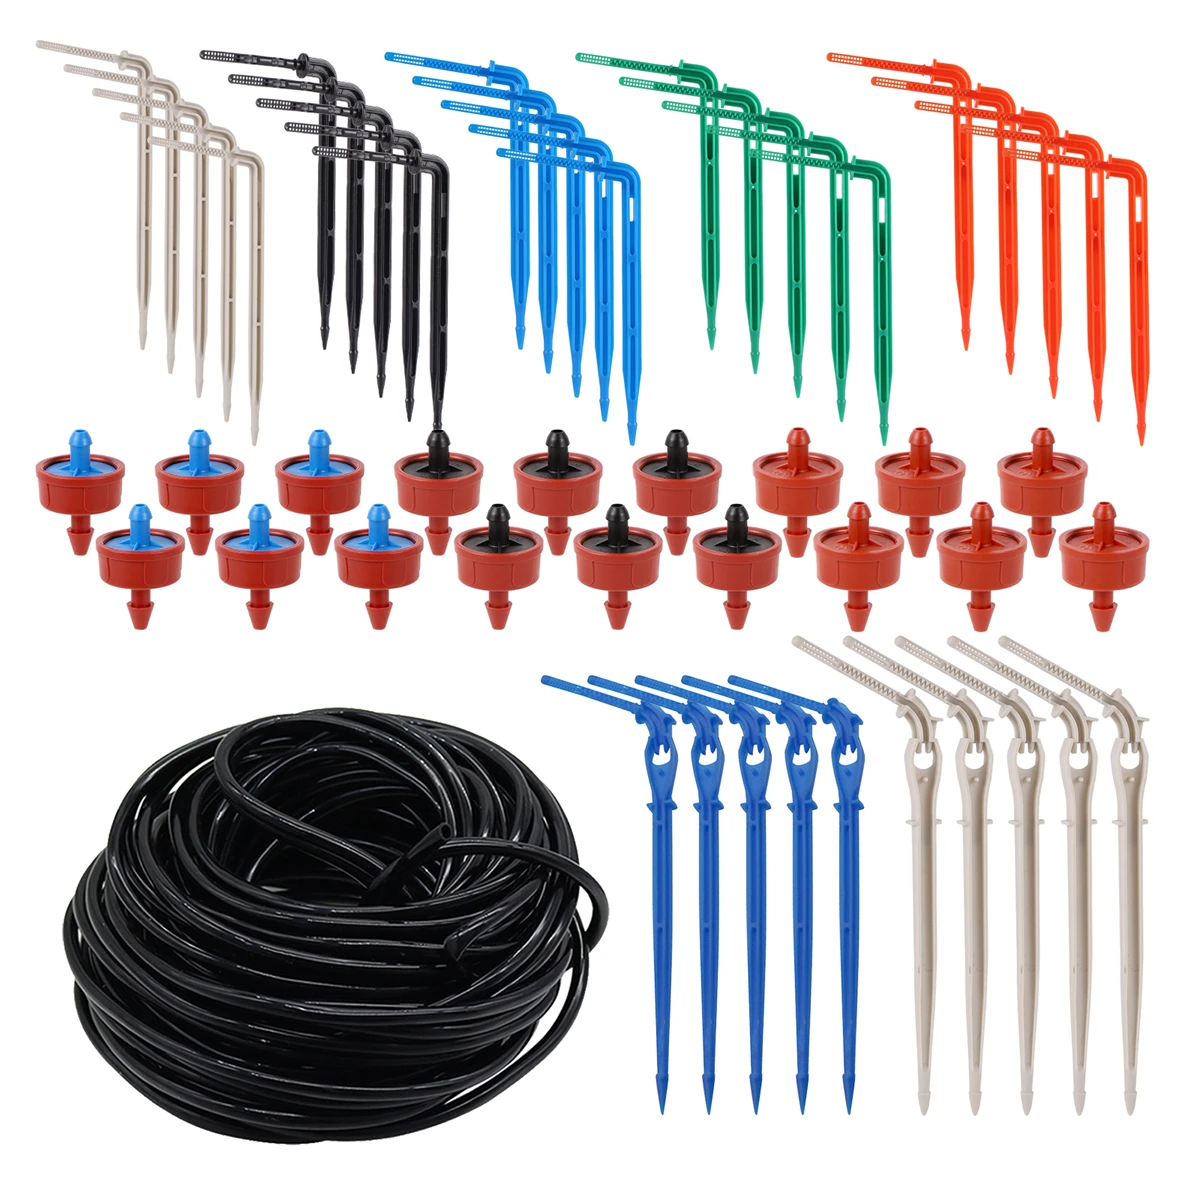 

50cm 4/7mm Hose Pressure Compensated Emitter Kits 7 Types One Arrow Dropper Garden Potted Plants Drip irrigation Device 10sets